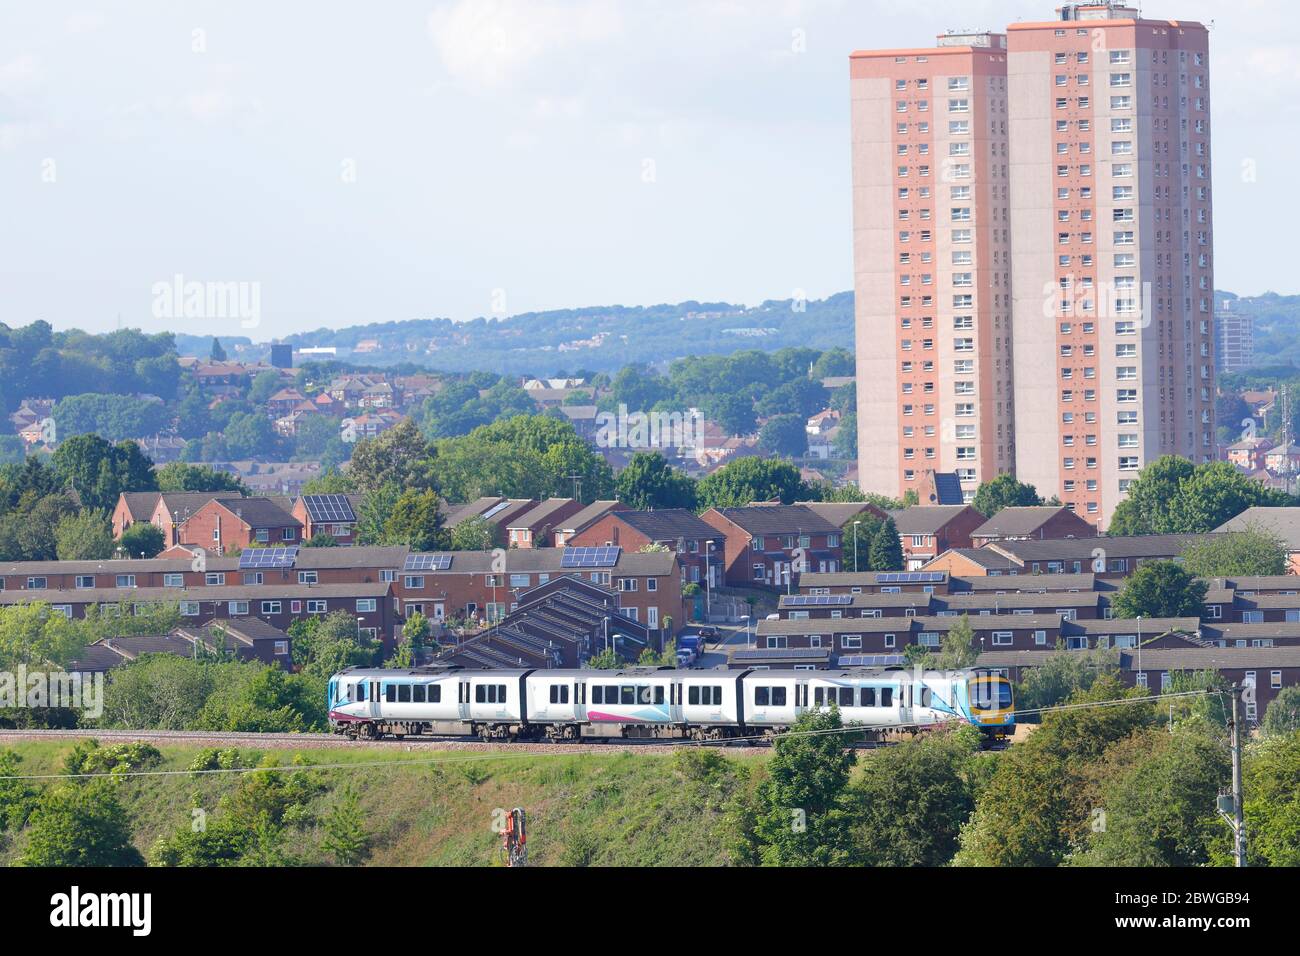 A Transpennine Express train on it's final stretch into Leeds from Newcastle. Stock Photo